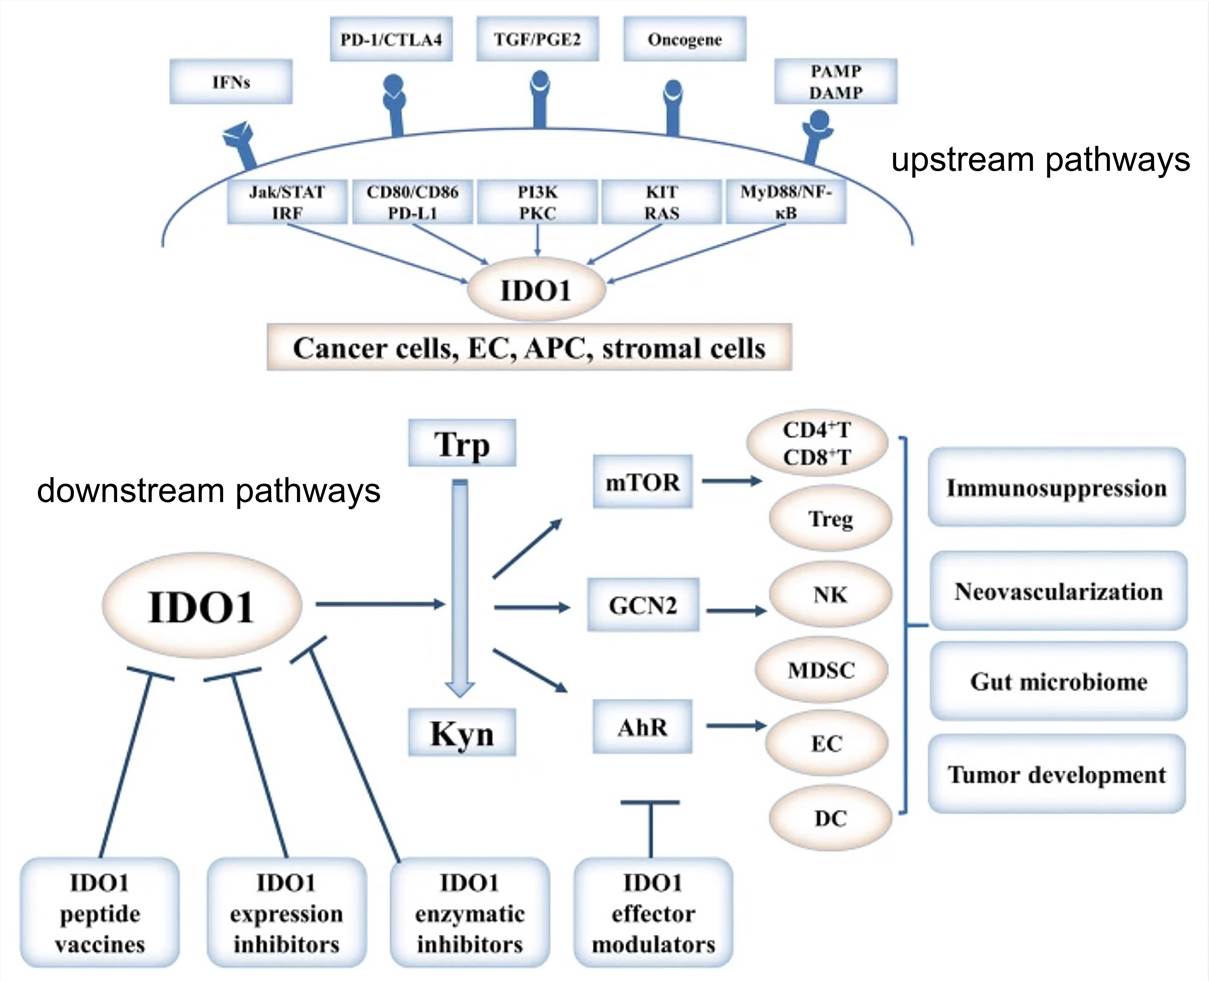 Regulation, function, and targeting of IDO1 in cancer. (Liu, 2018)